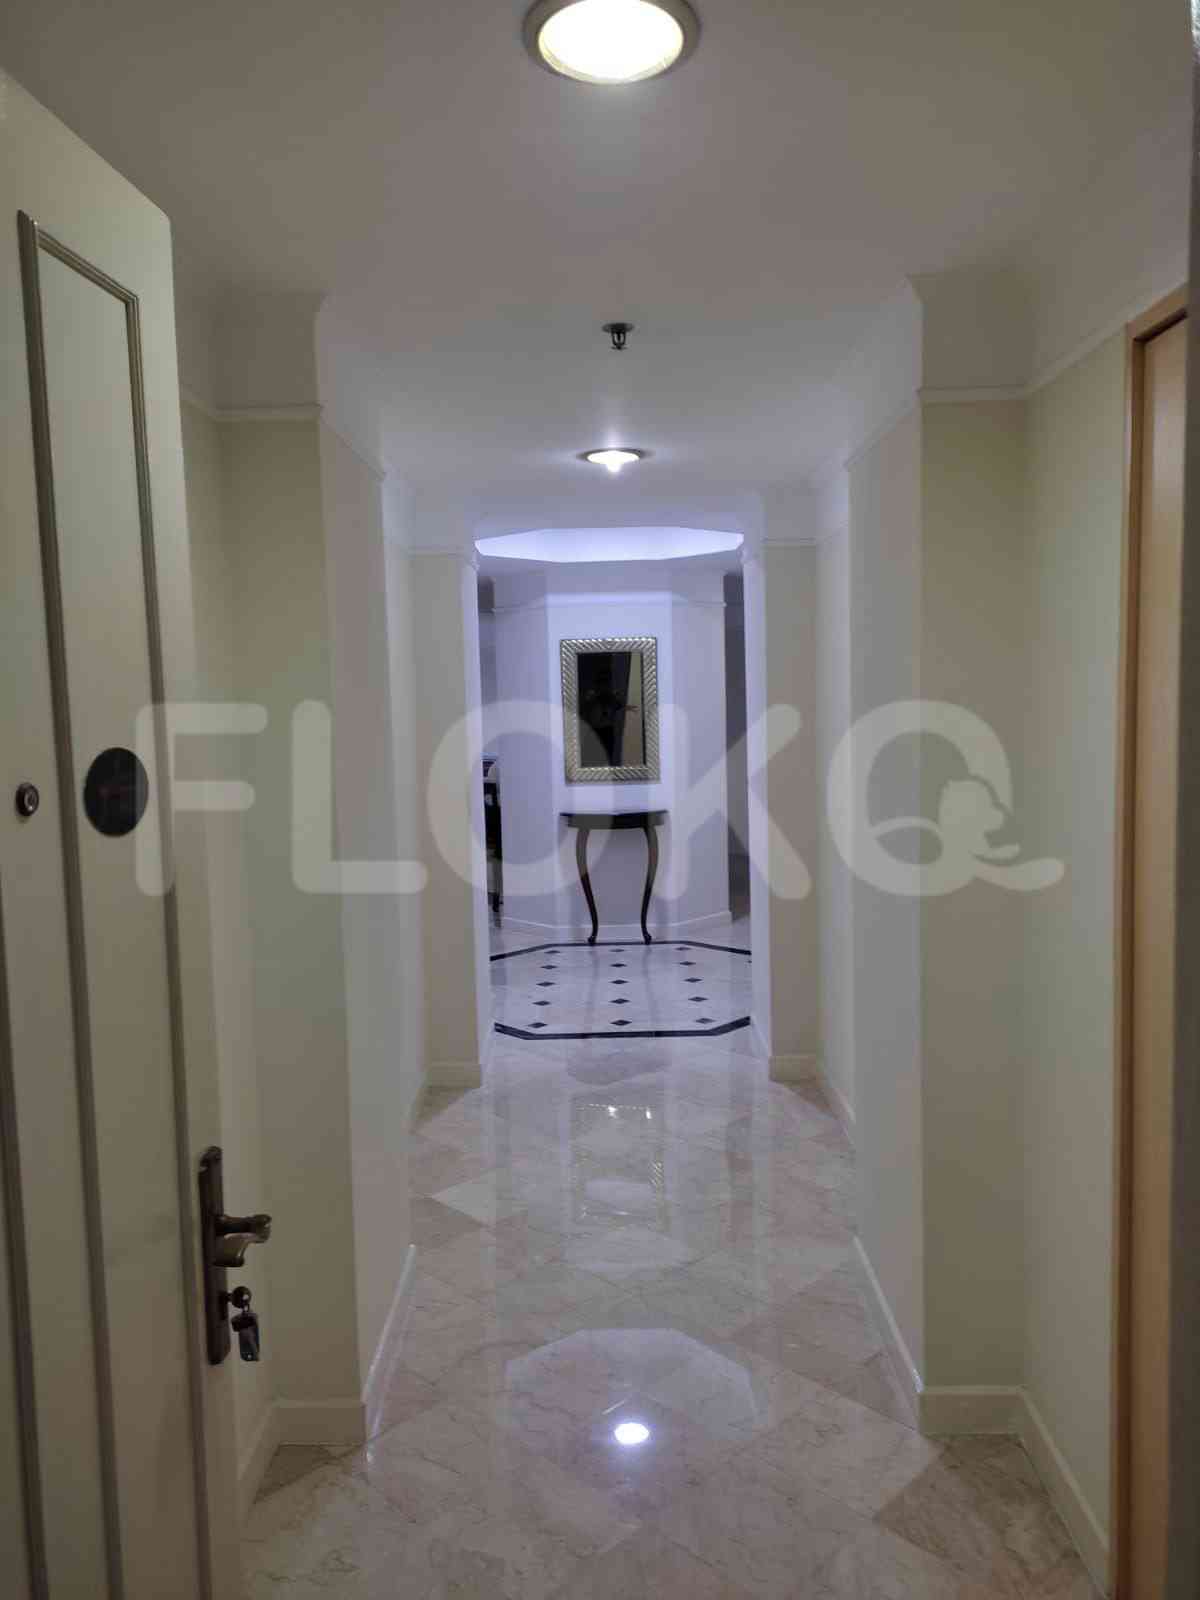 3 Bedroom on 3rd Floor for Rent in Golfhill Terrace Apartment - fpo482 7